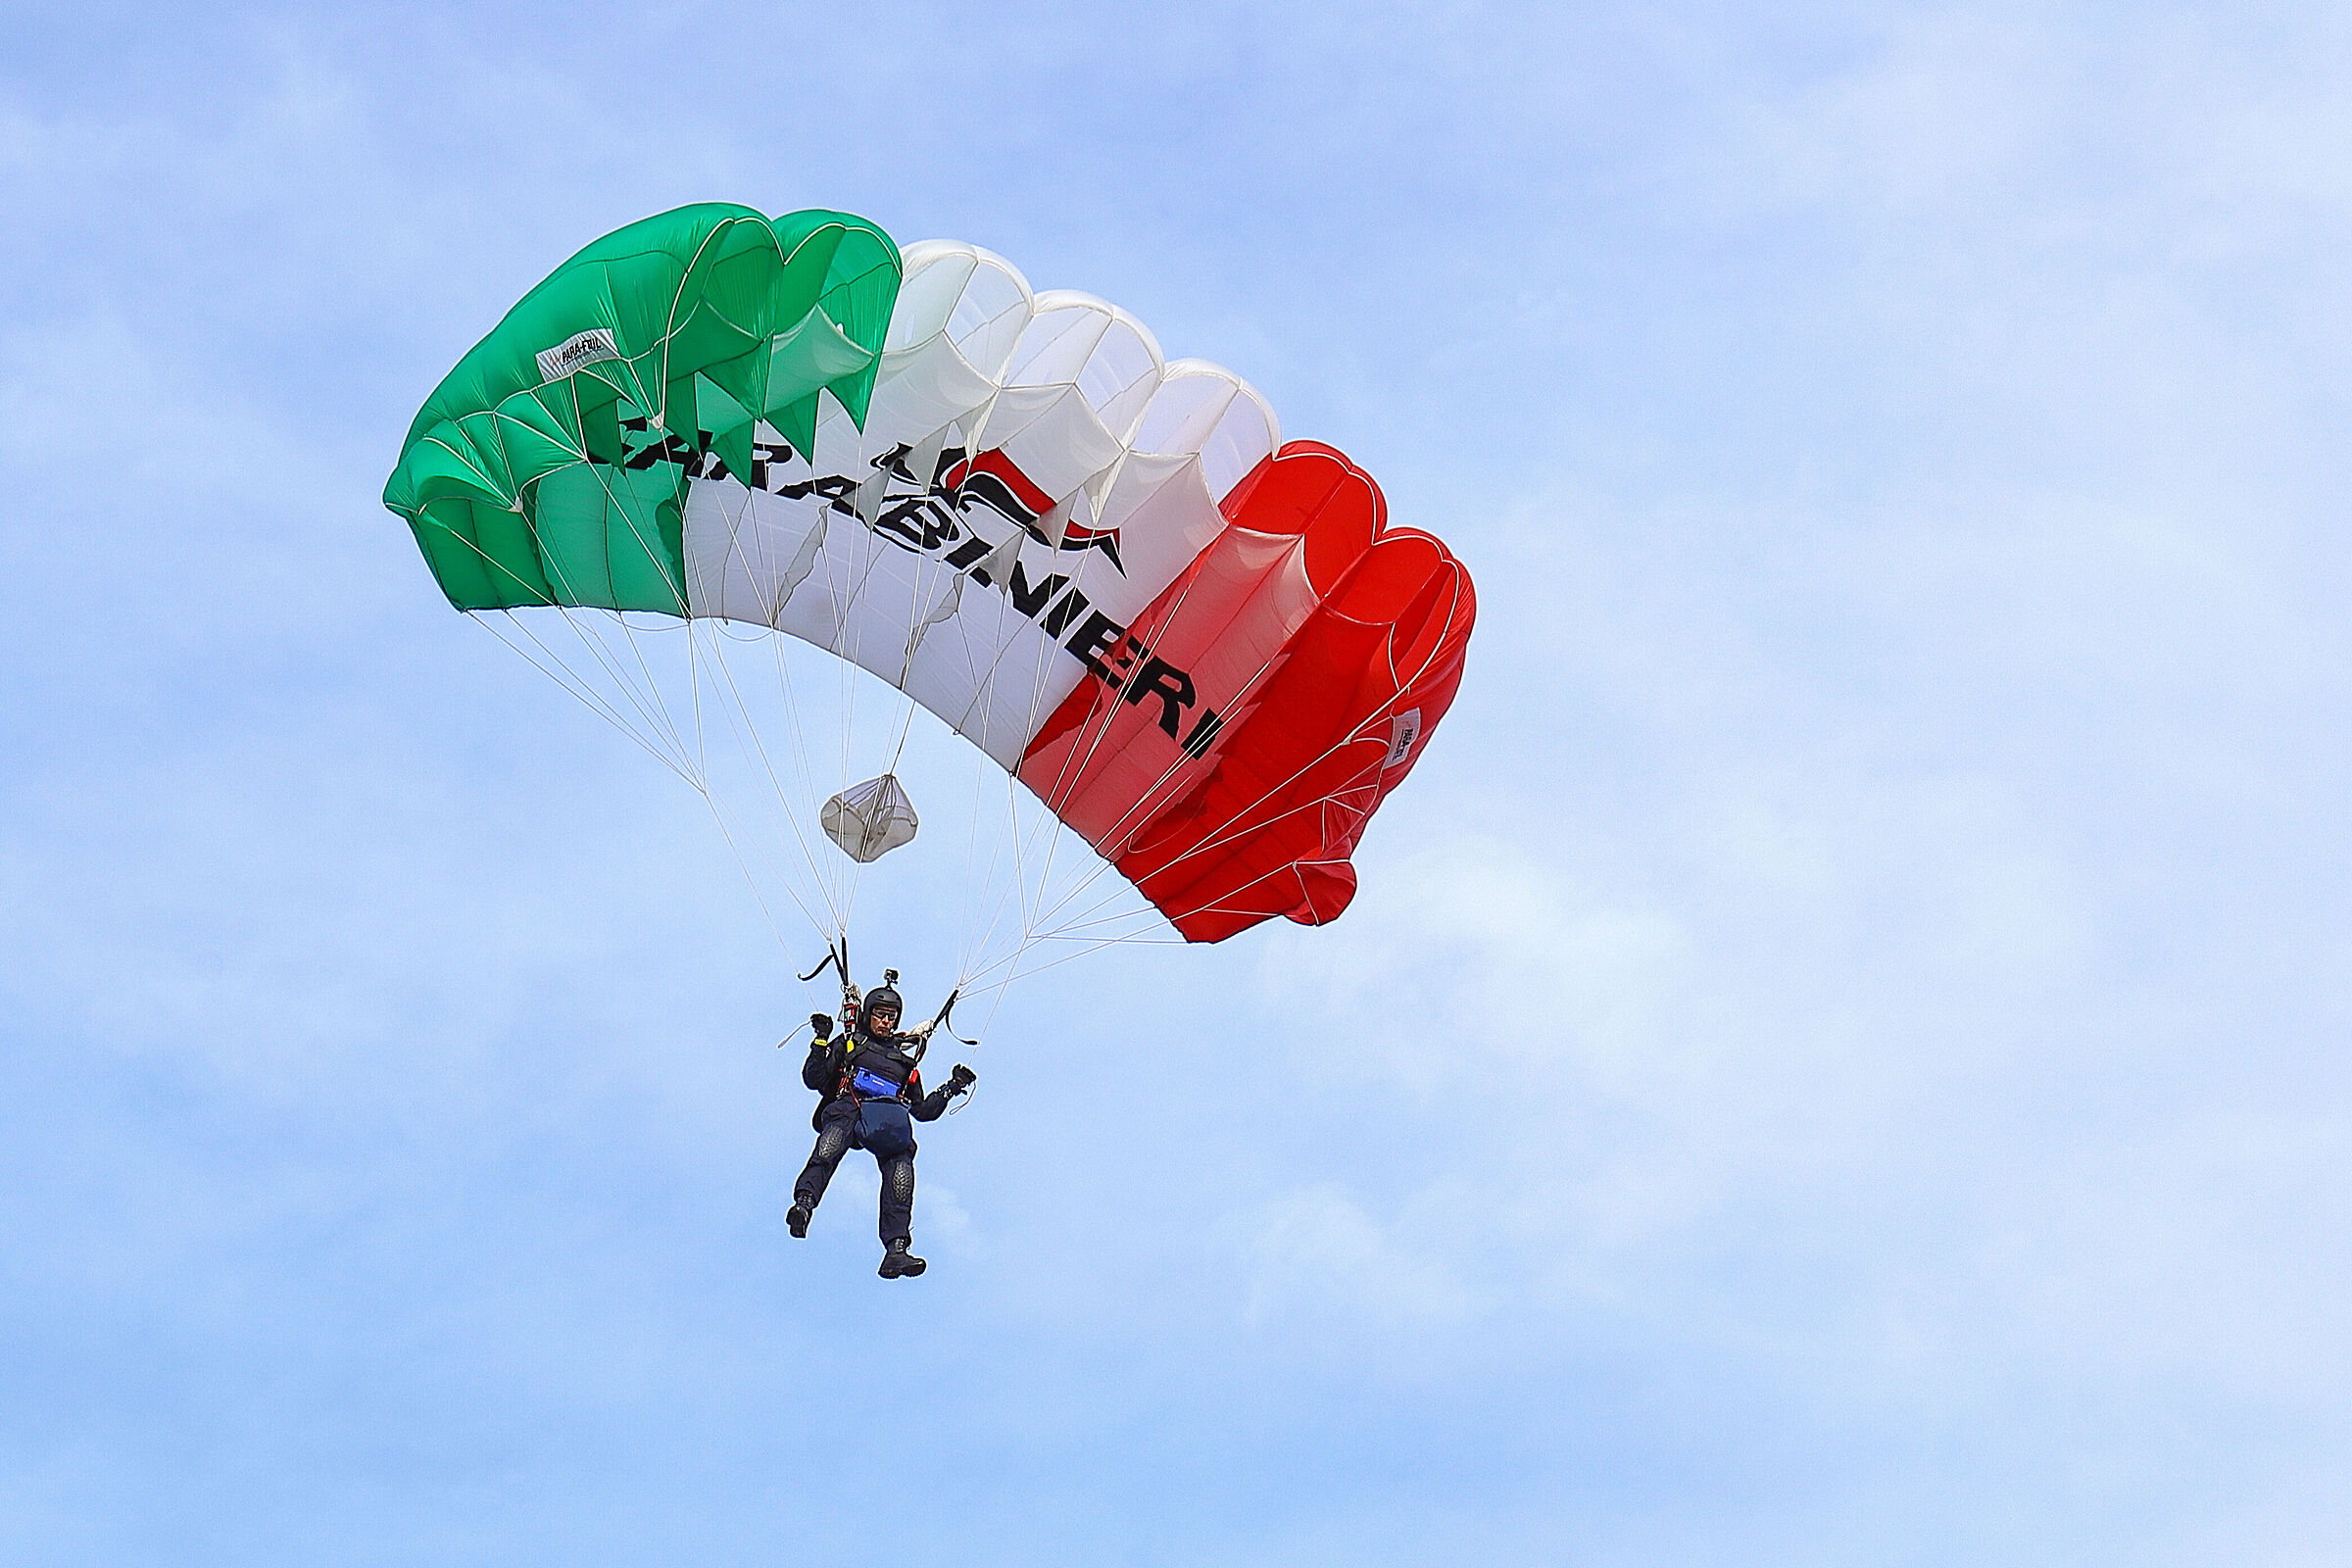 Carabiniere paratrooper at the "vintage sails" in Imperia...